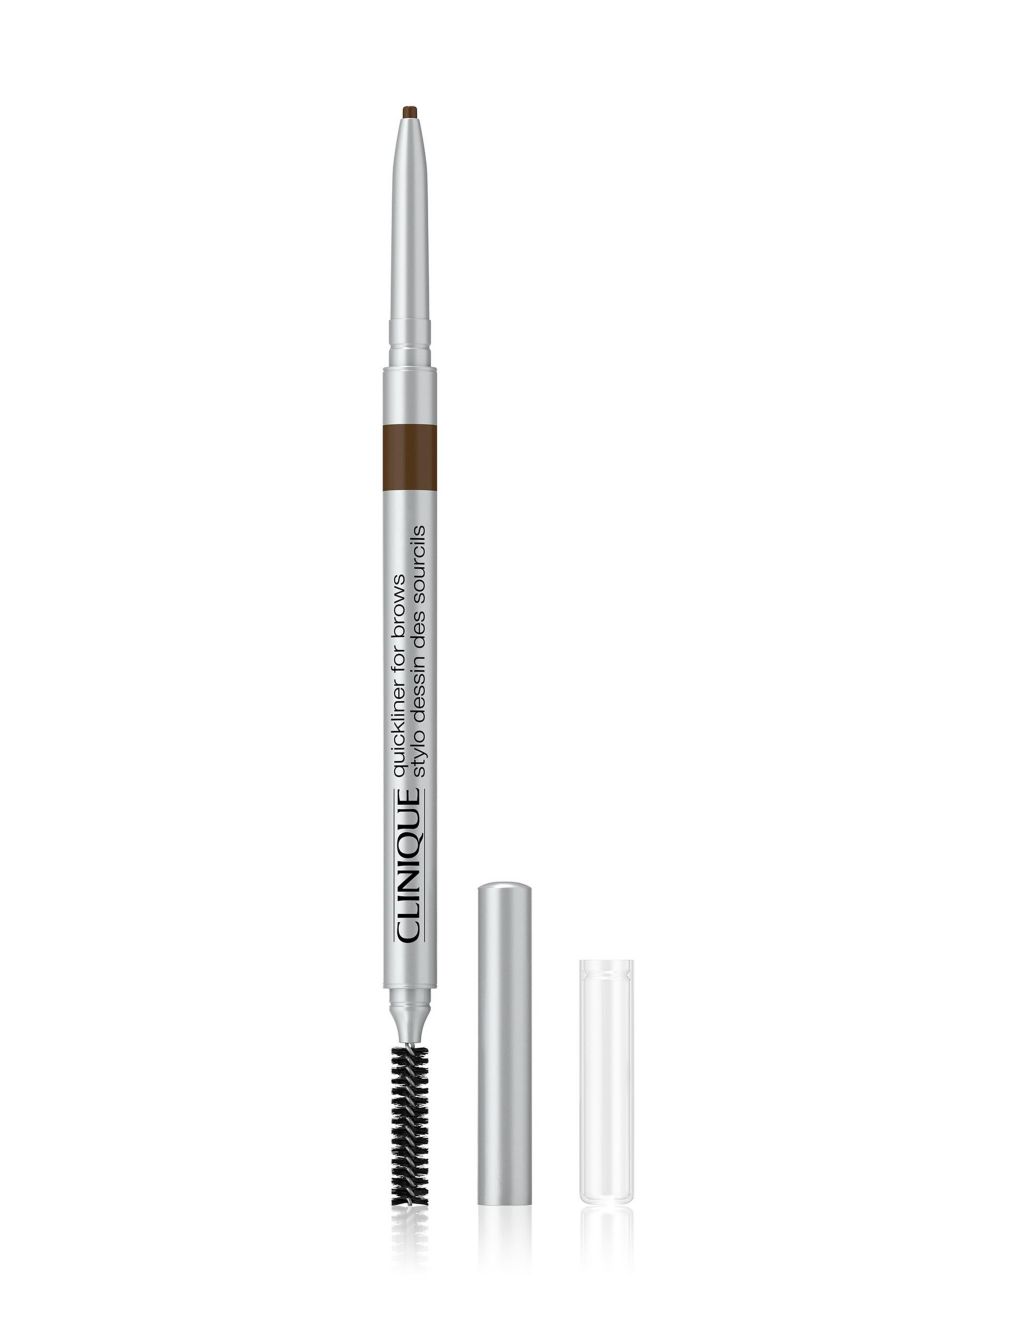 Quickliner™ for Brows 0.6g